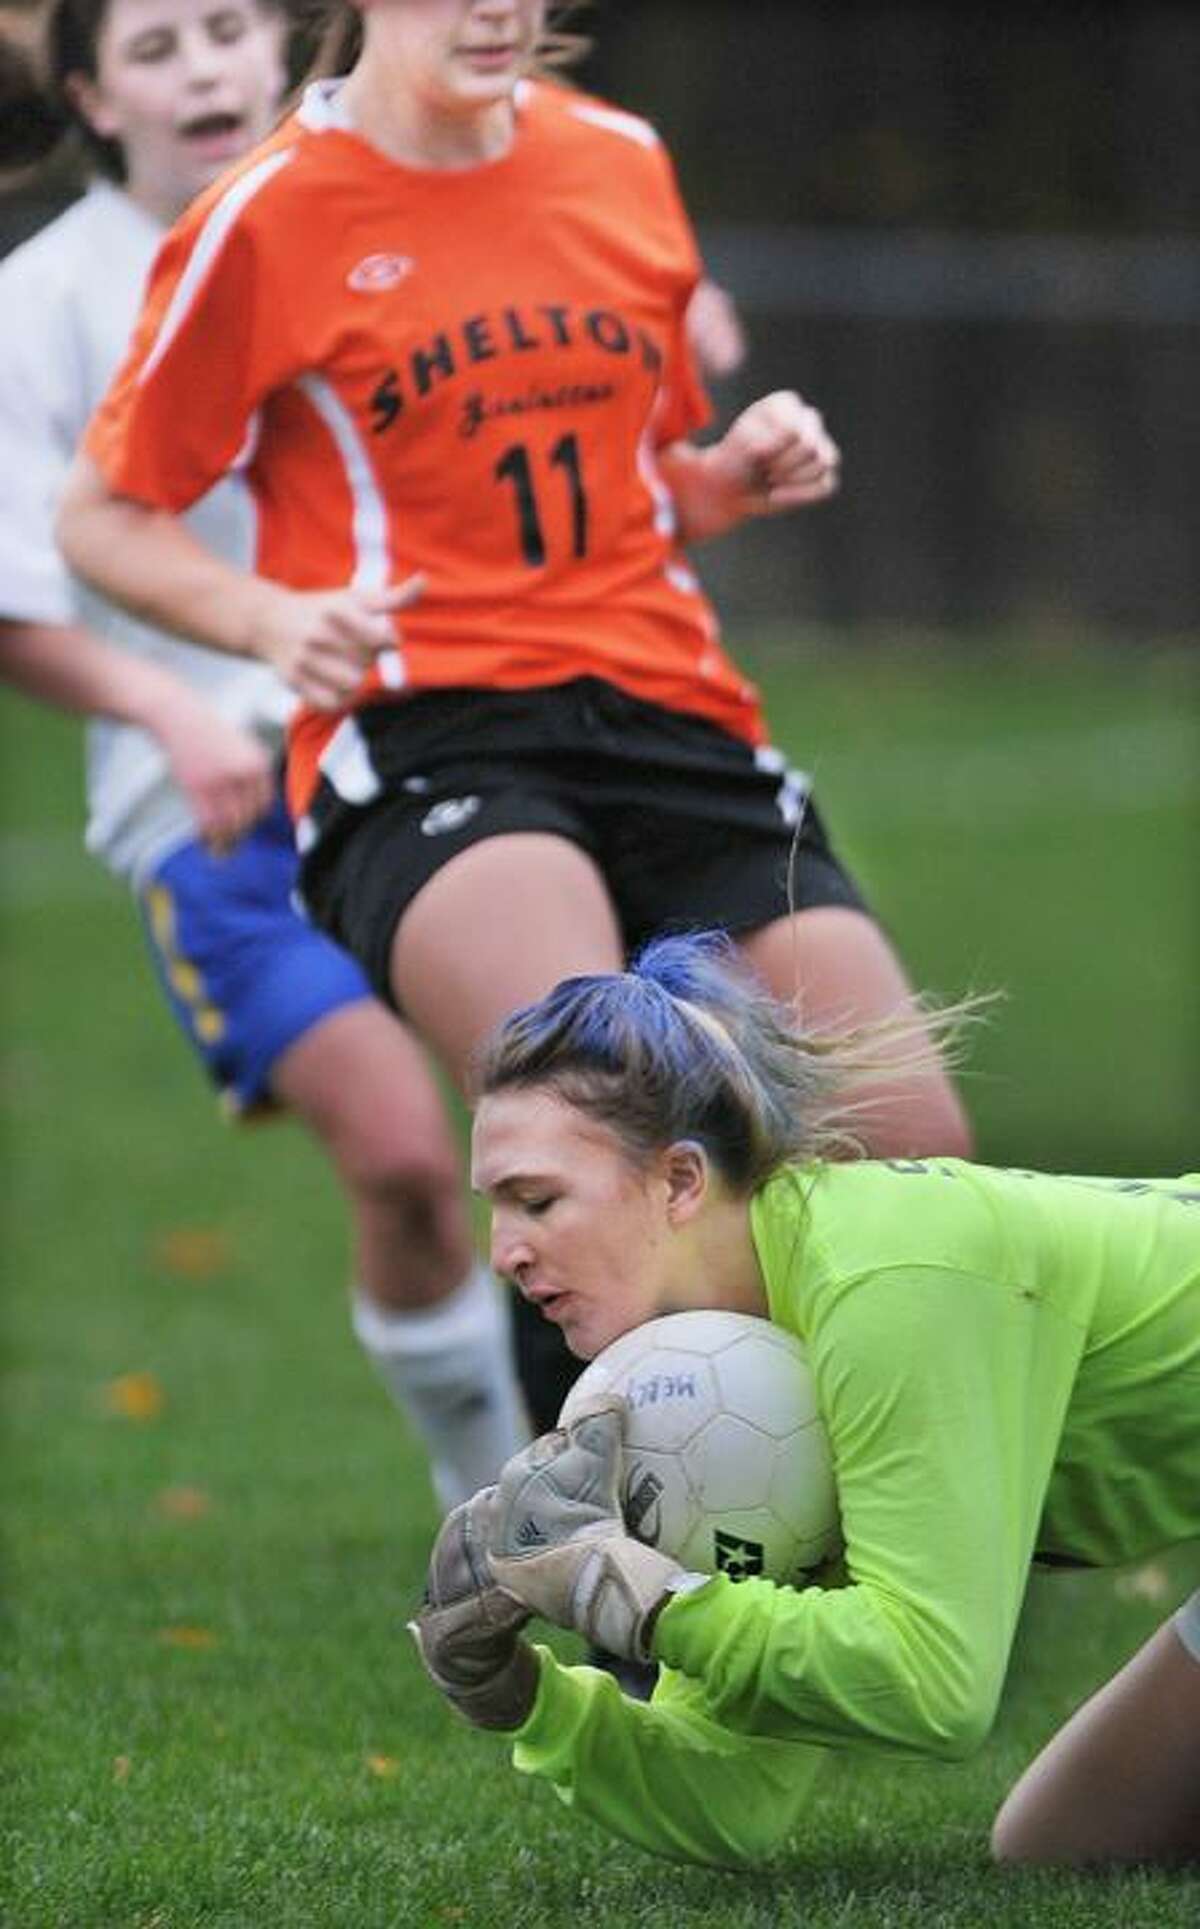 Mercy goalie, captain Katie Donnelly beats Shelton's Angela Ferro to the ball during senior night at Tiger Field in Middletown Friday. Shelton defeated Mercy 2-1. (Catherine Avalone